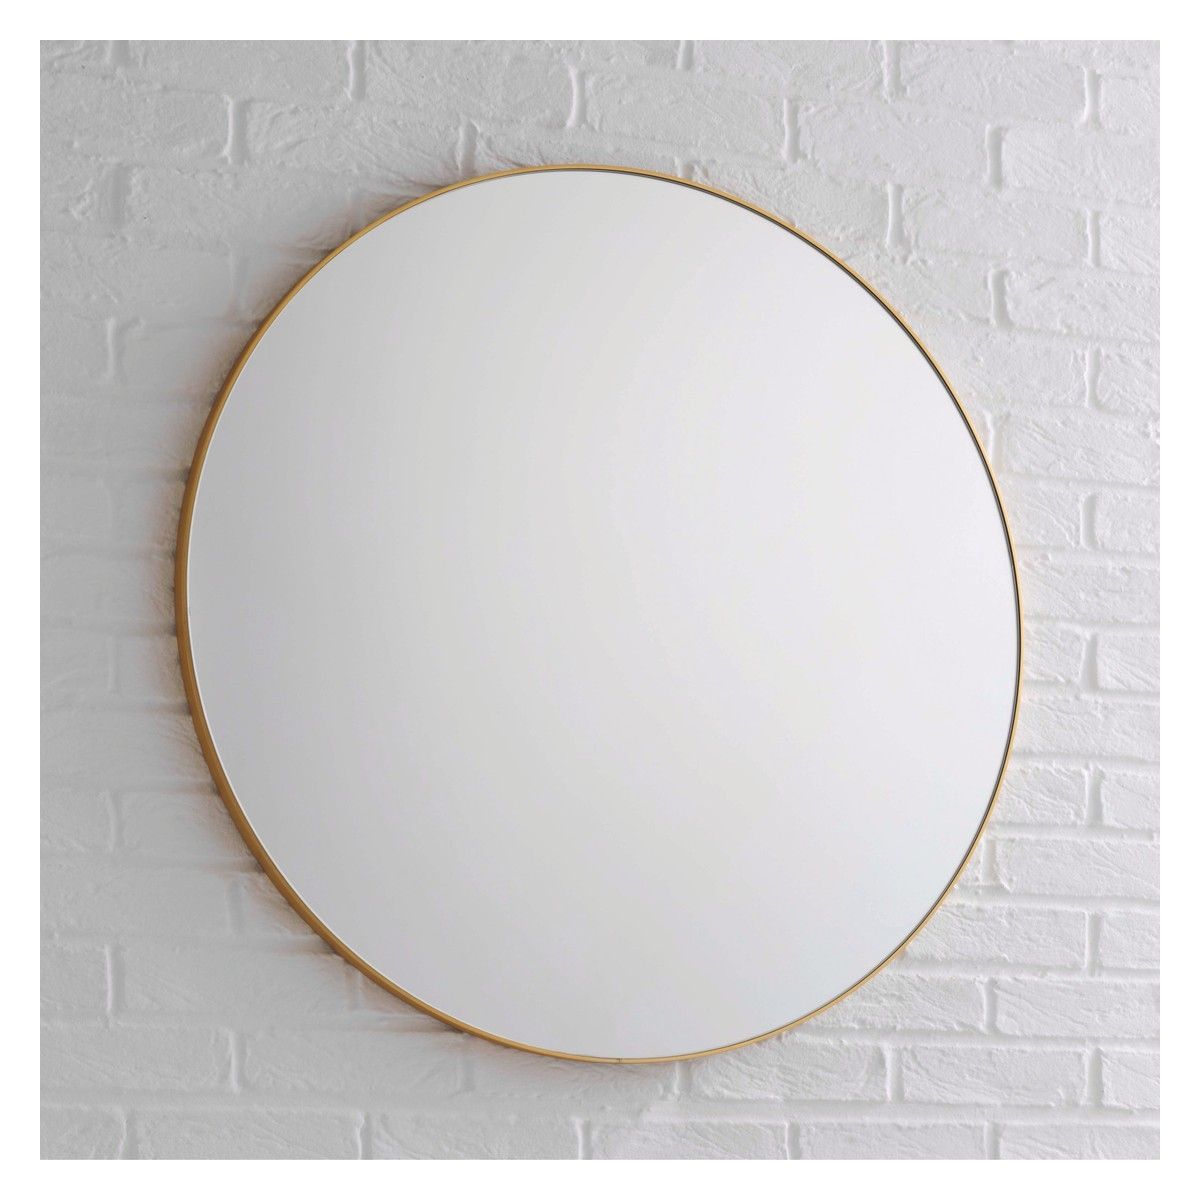 Patsy Large Round Gold Wall Mirror D82cm Buy Now At Habitat Uk Throughout Large Round Mirrors For Sale (Photo 11 of 15)